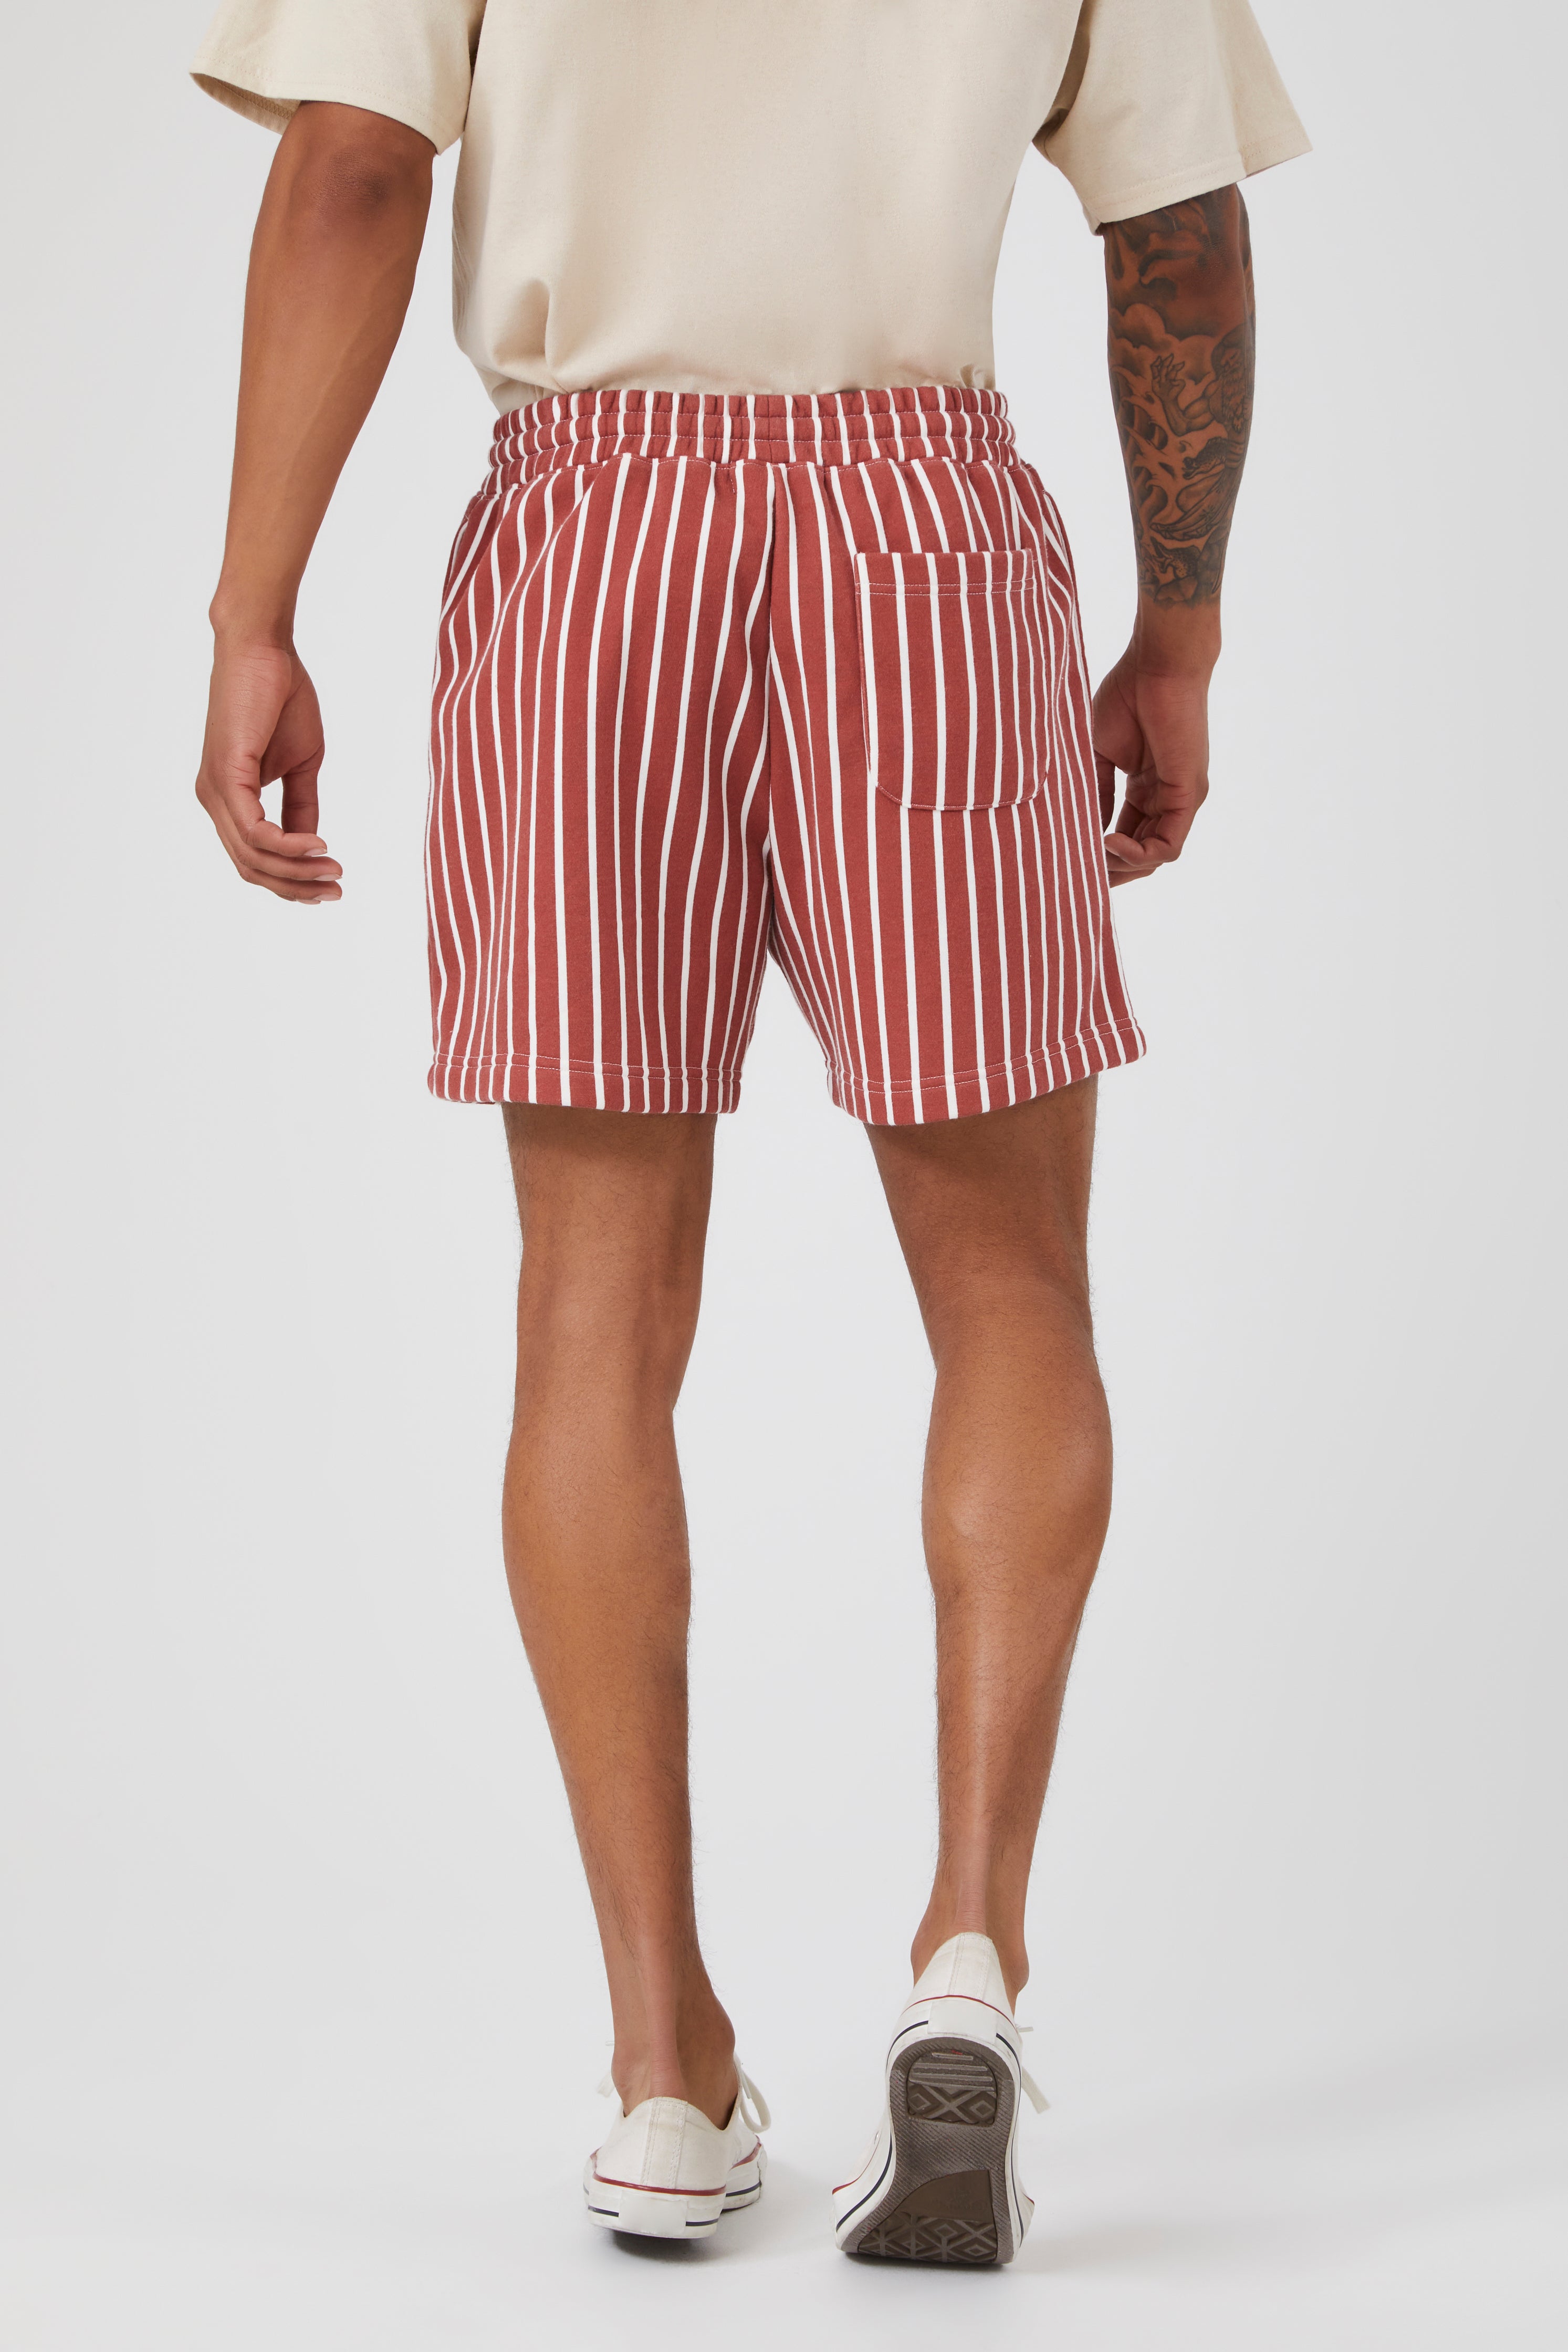 Rustwhite French Terry Striped Shorts 3